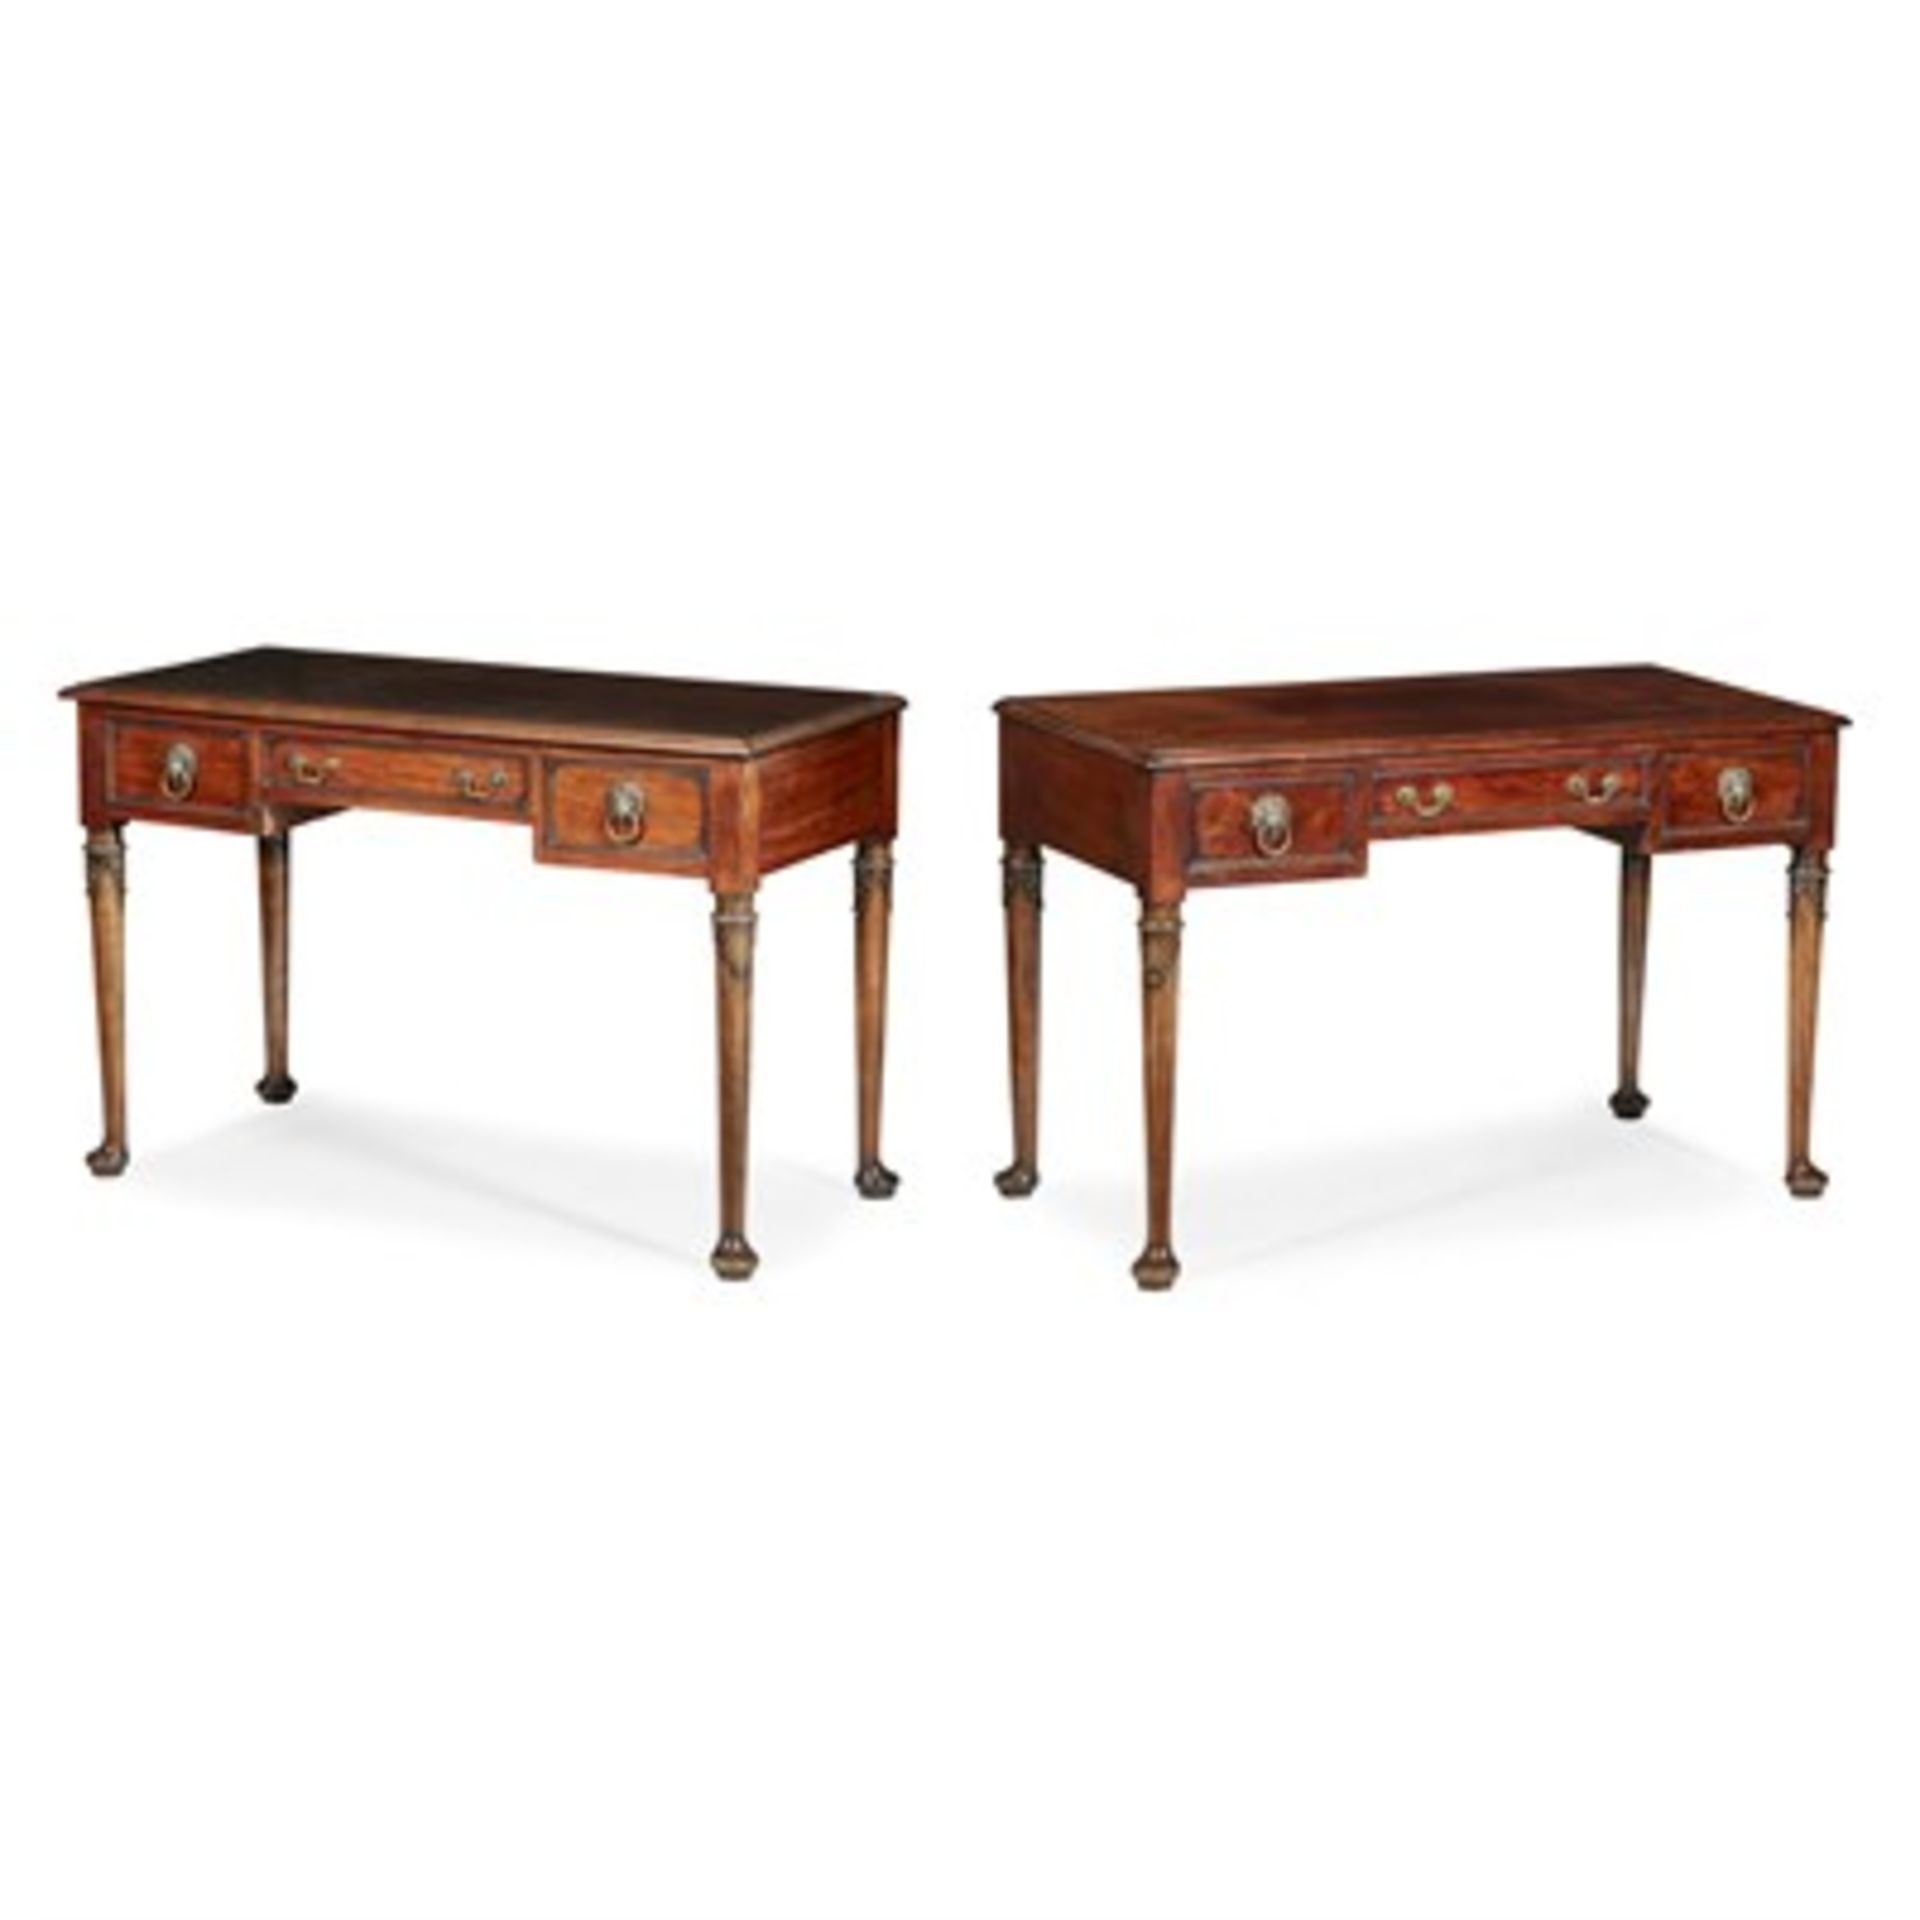 PAIR OF GEORGE II MAHOGANY WRITING TABLES MID 18TH CENTURY the rectangular tops with moulded edges